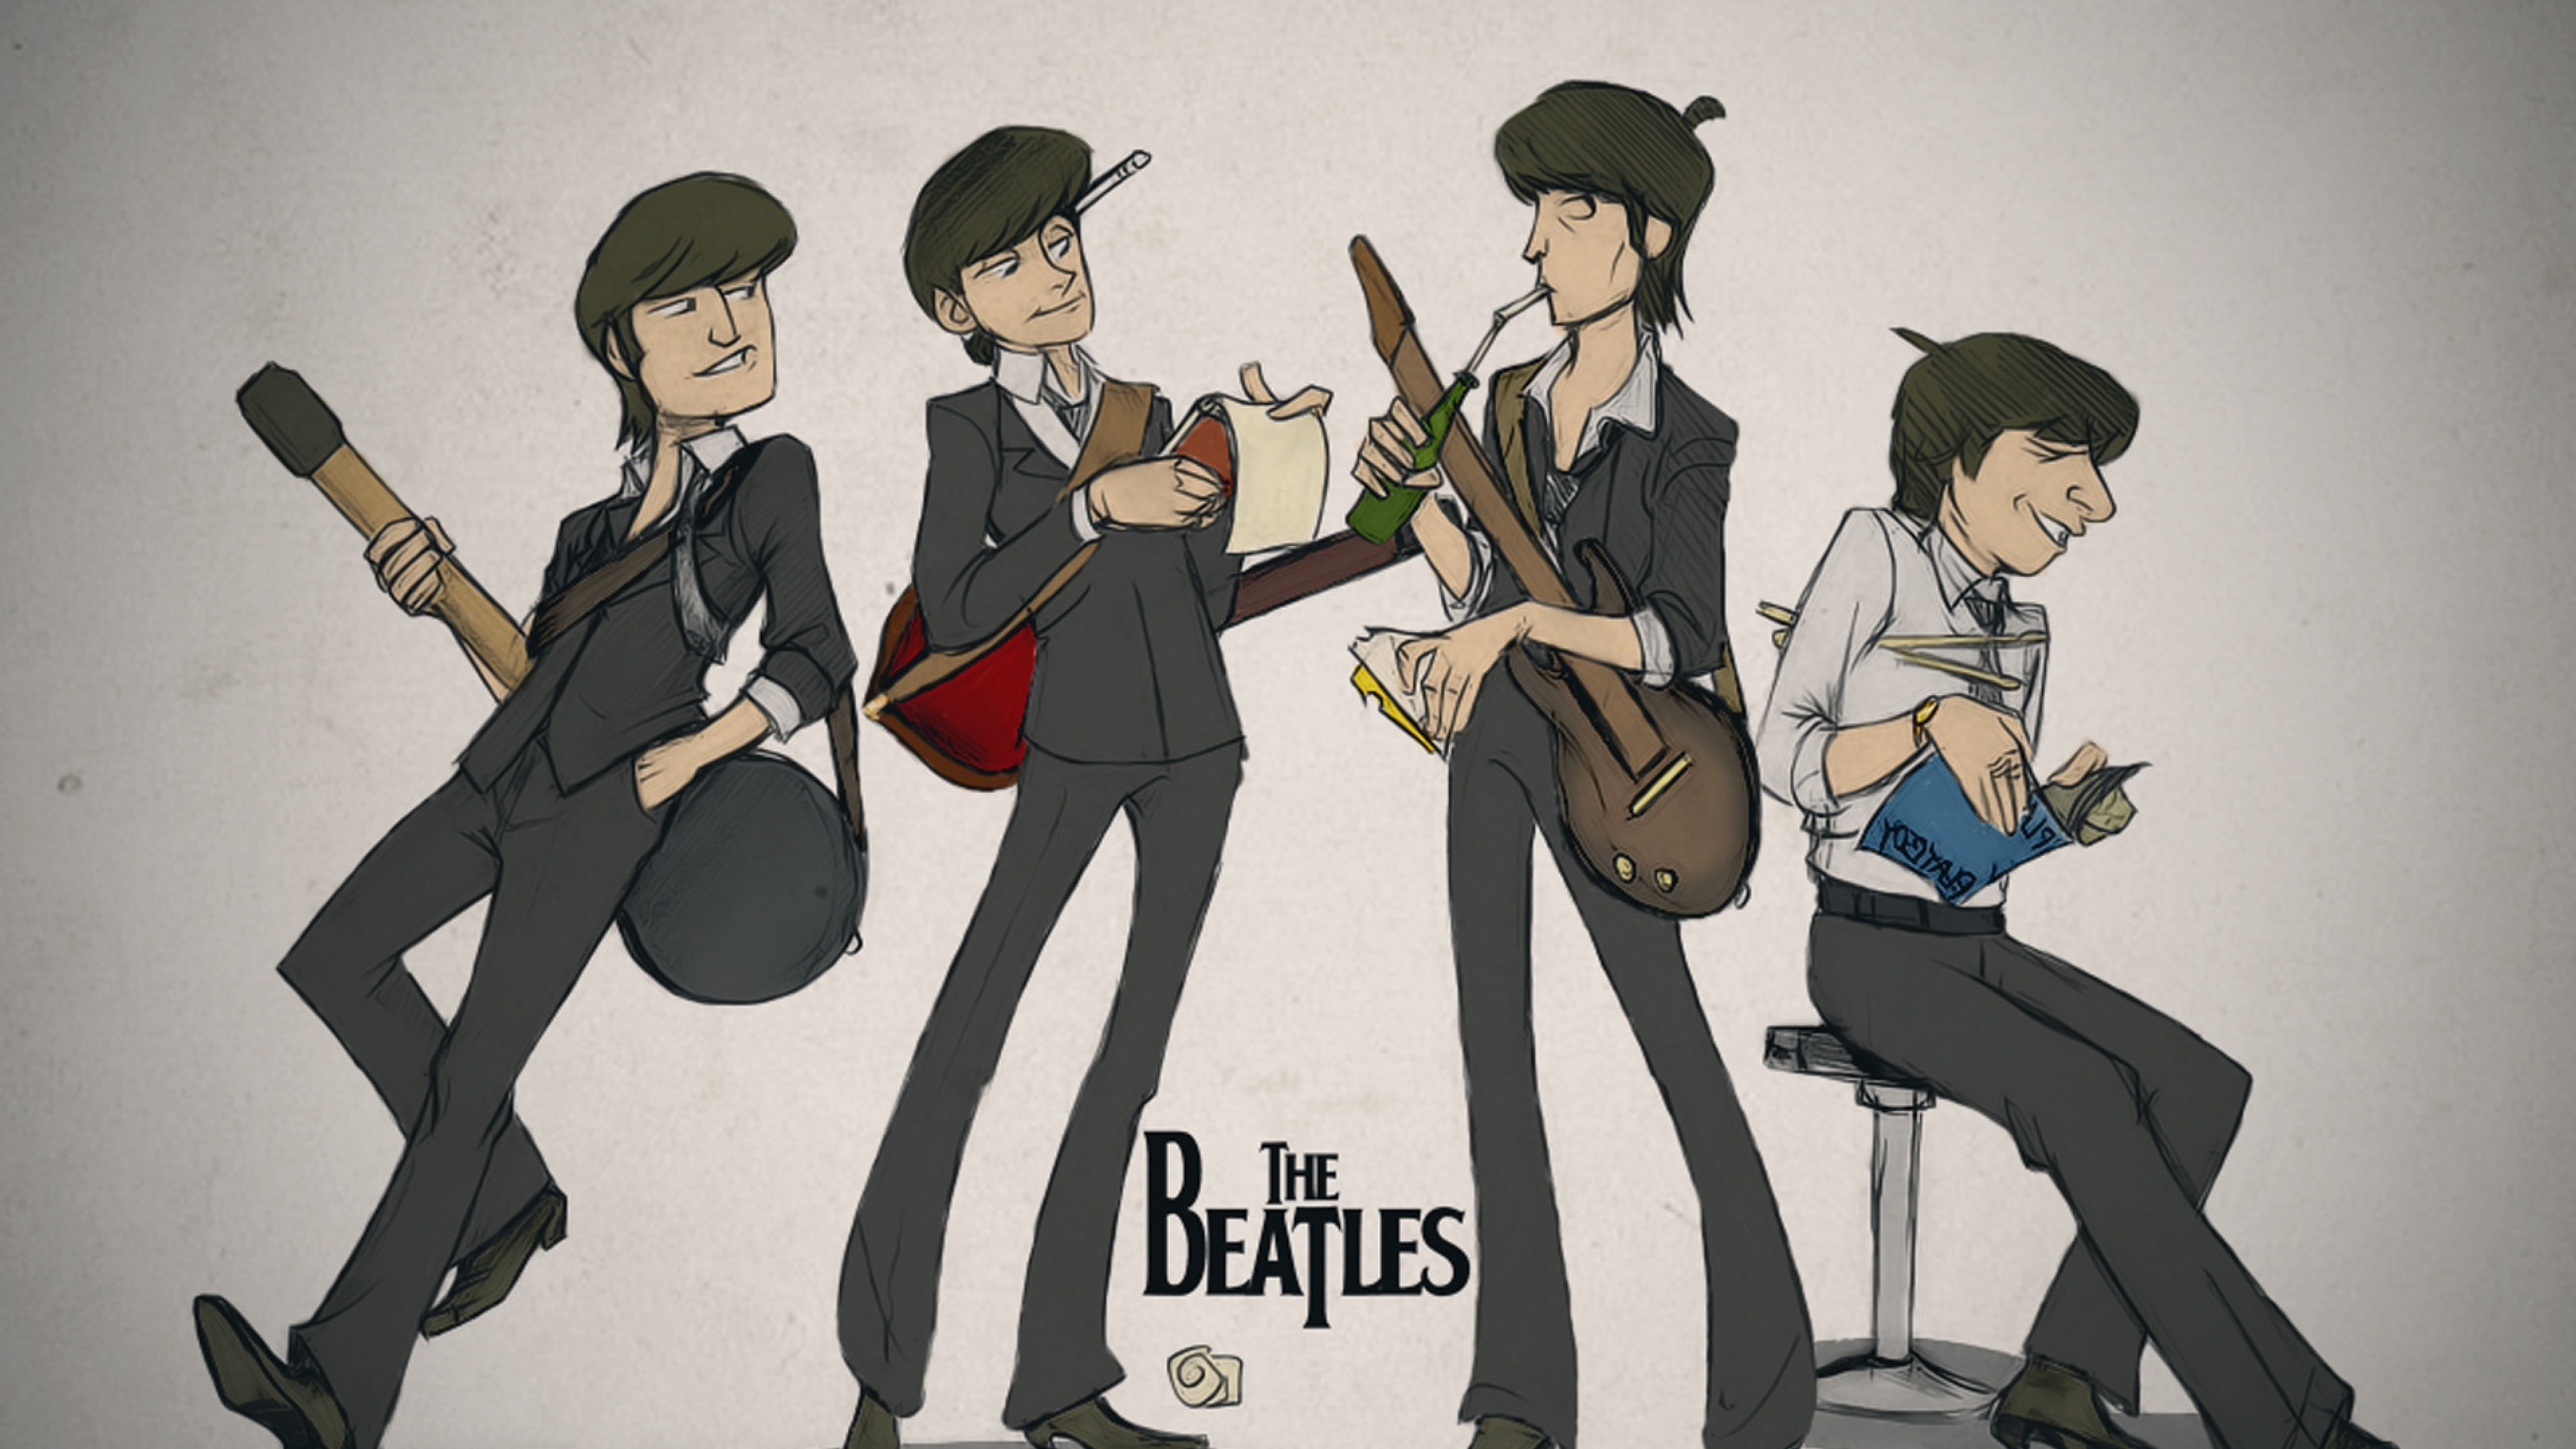 The Beatles HD Wallpaper for Desktop and Mobiles 4K Ultra HD